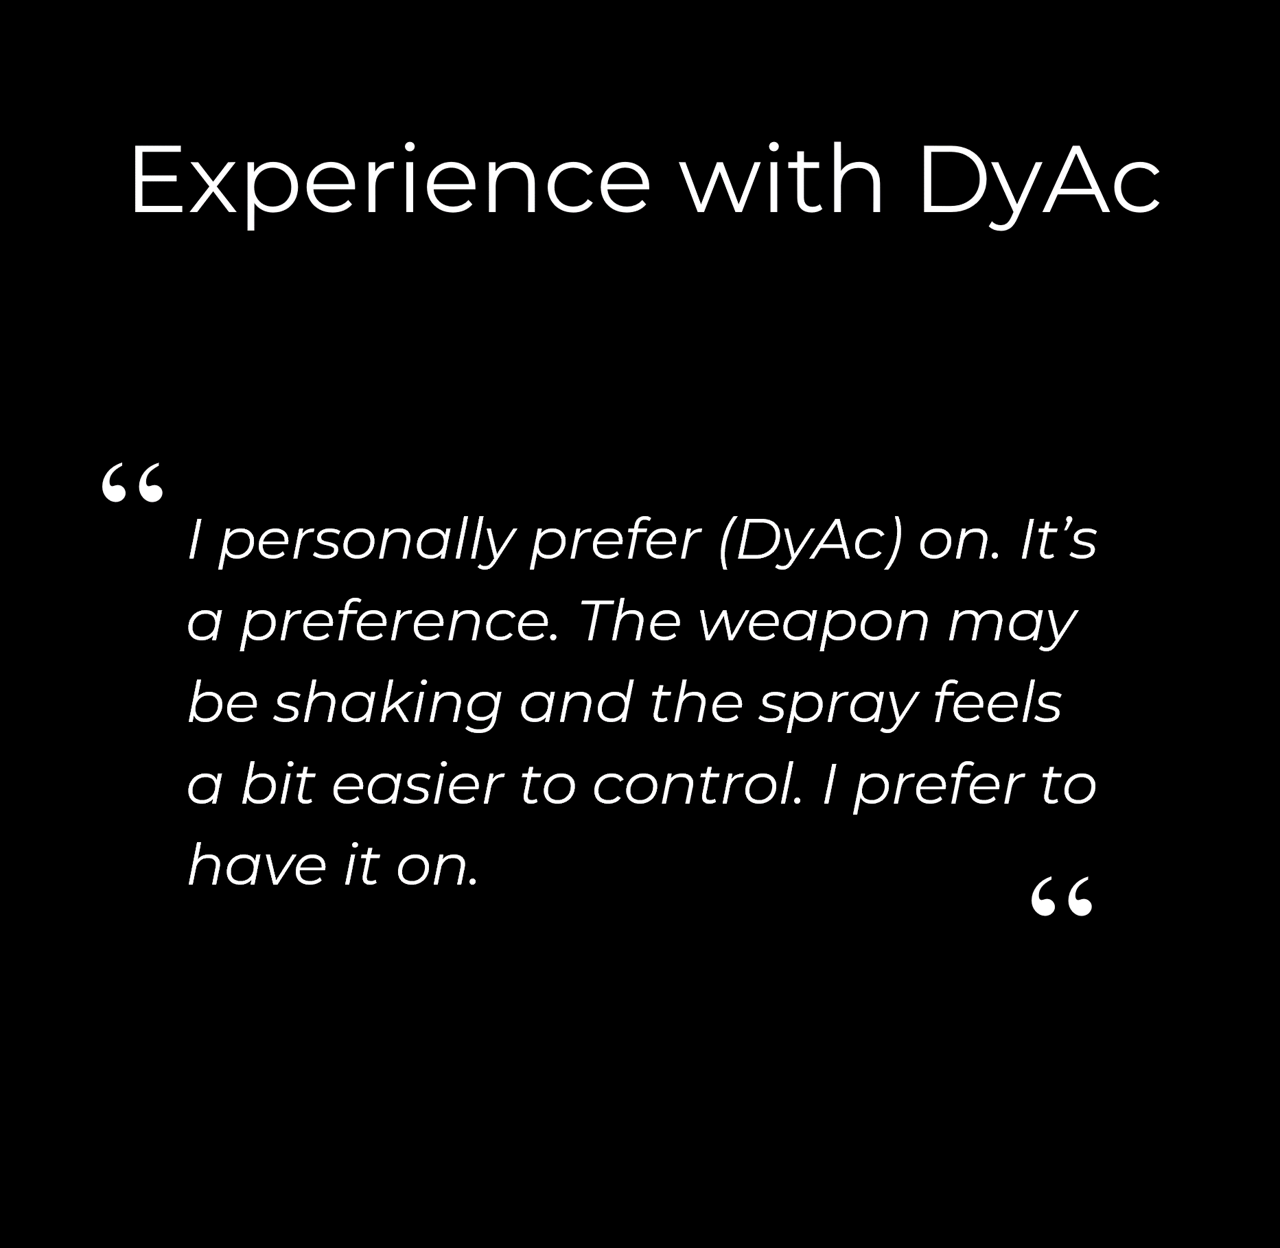 Experience with DyAc